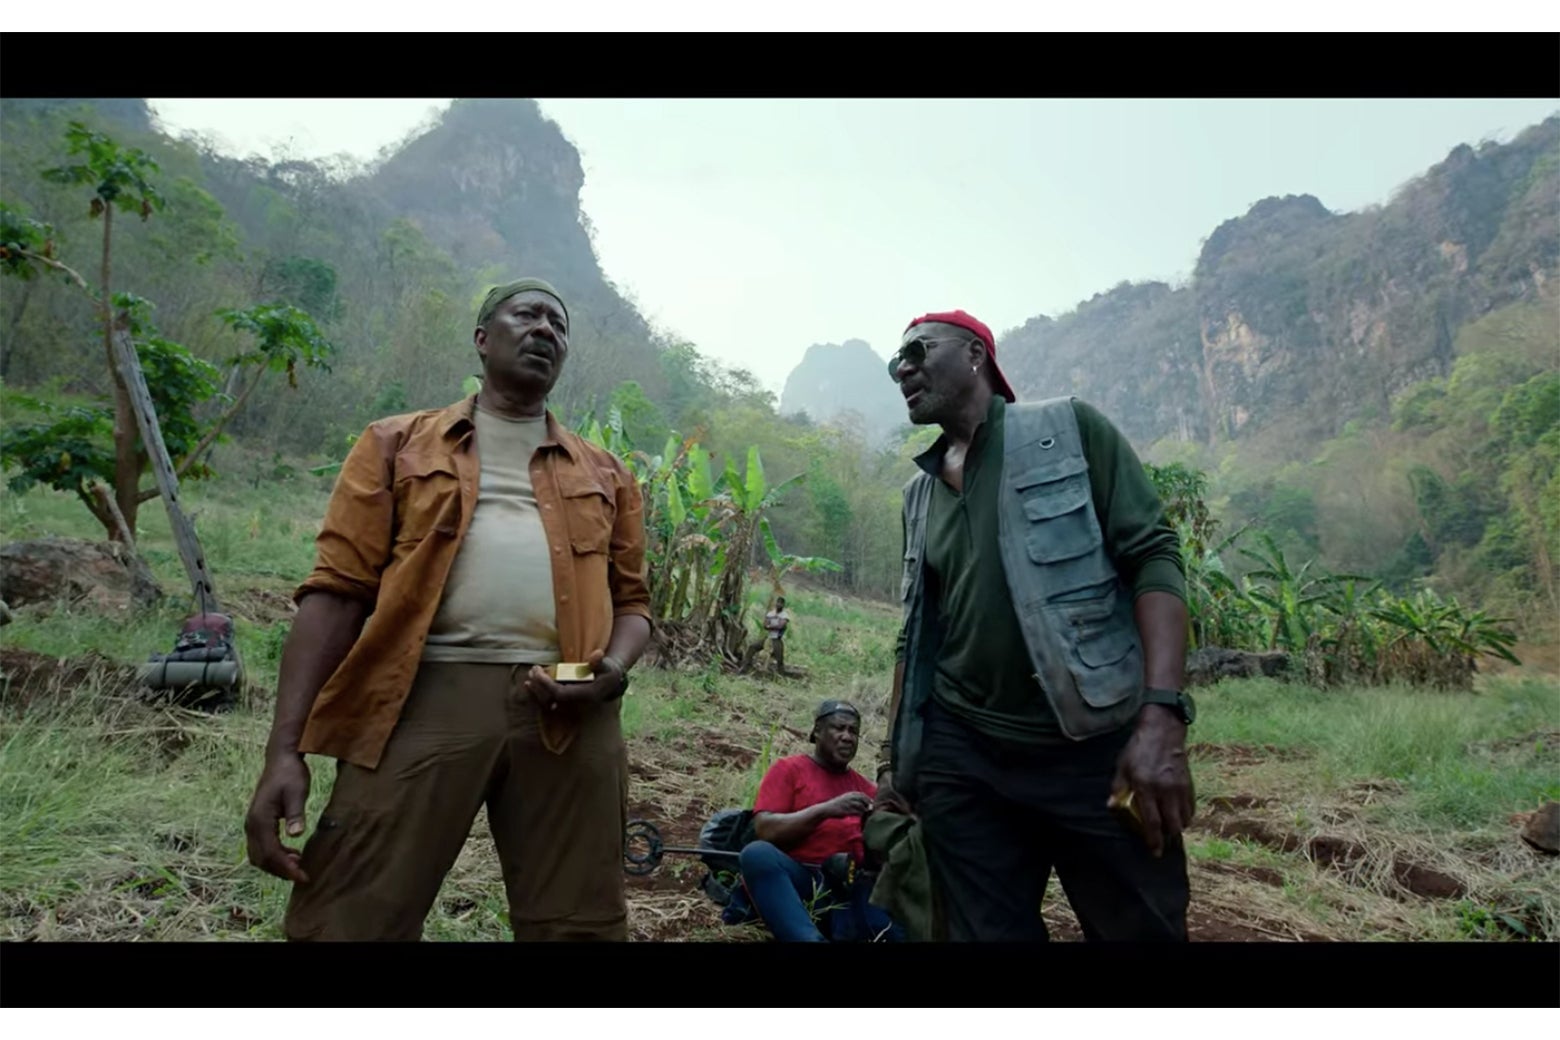 A scene from Da 5 Bloods showing Clarke Peters, Delroy Lindo, and Isaiah Whitlock Jr. in the jungles of Vietnam.